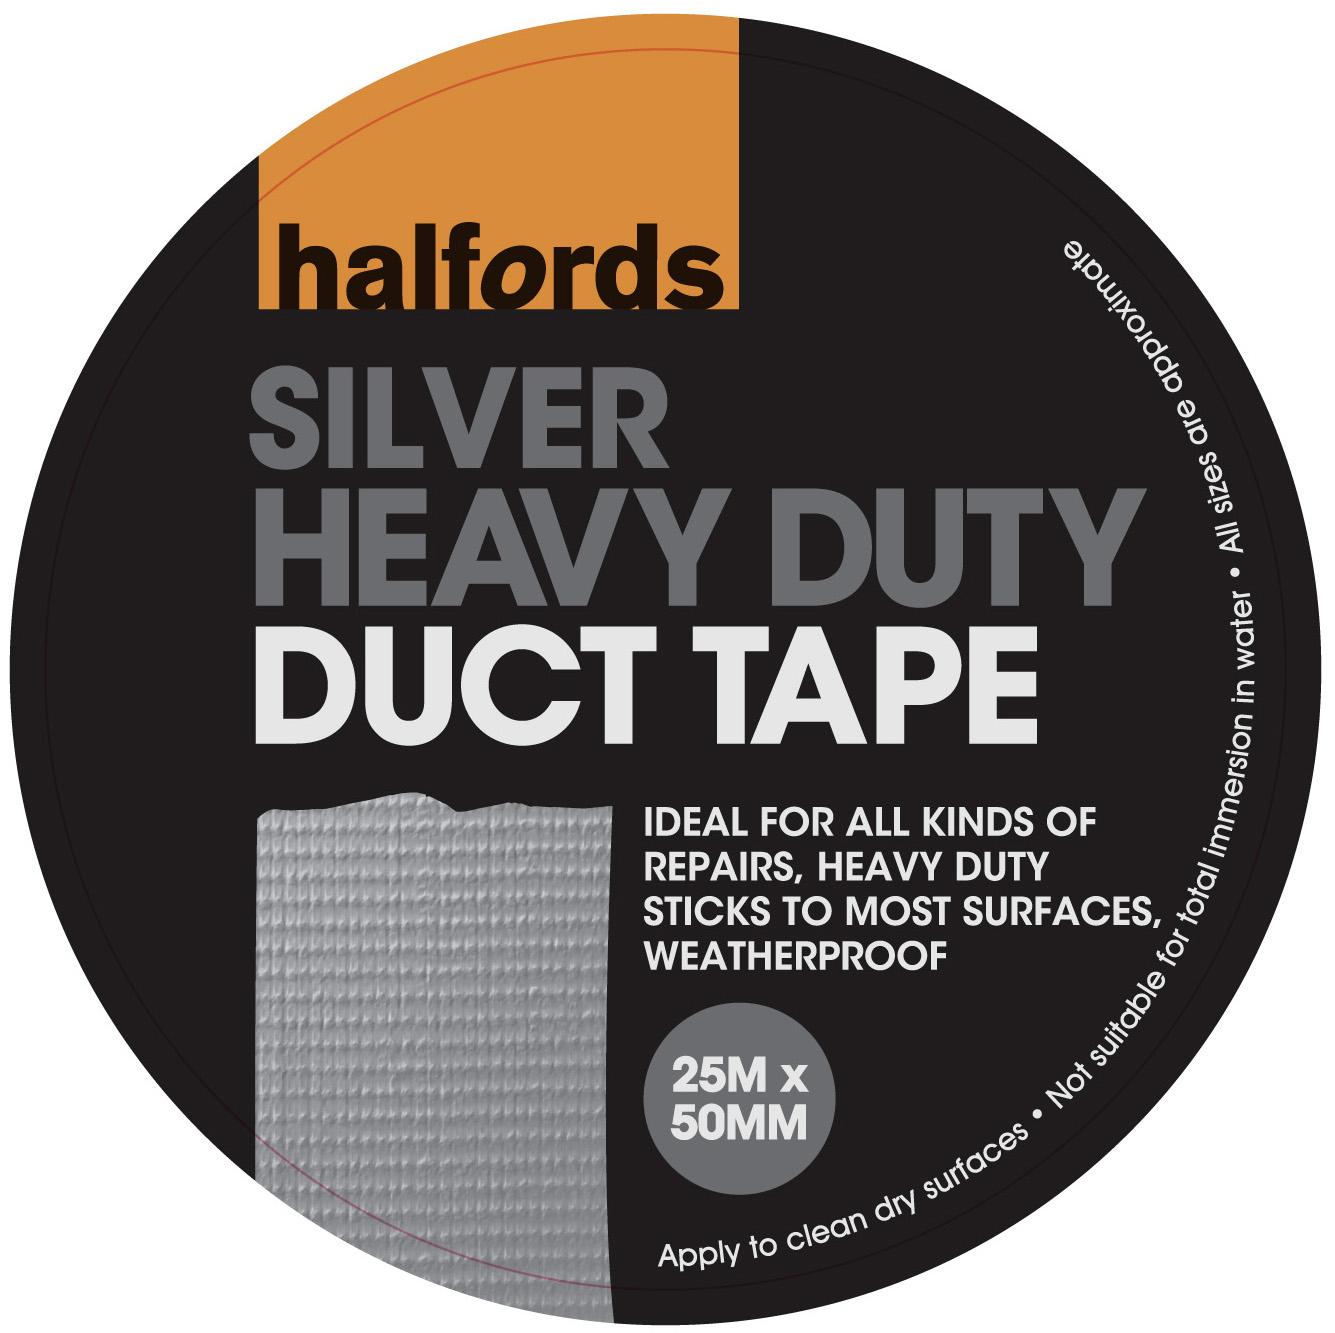 Halfords Heavy Duty Duct Tape Silver 50Mm X 25M